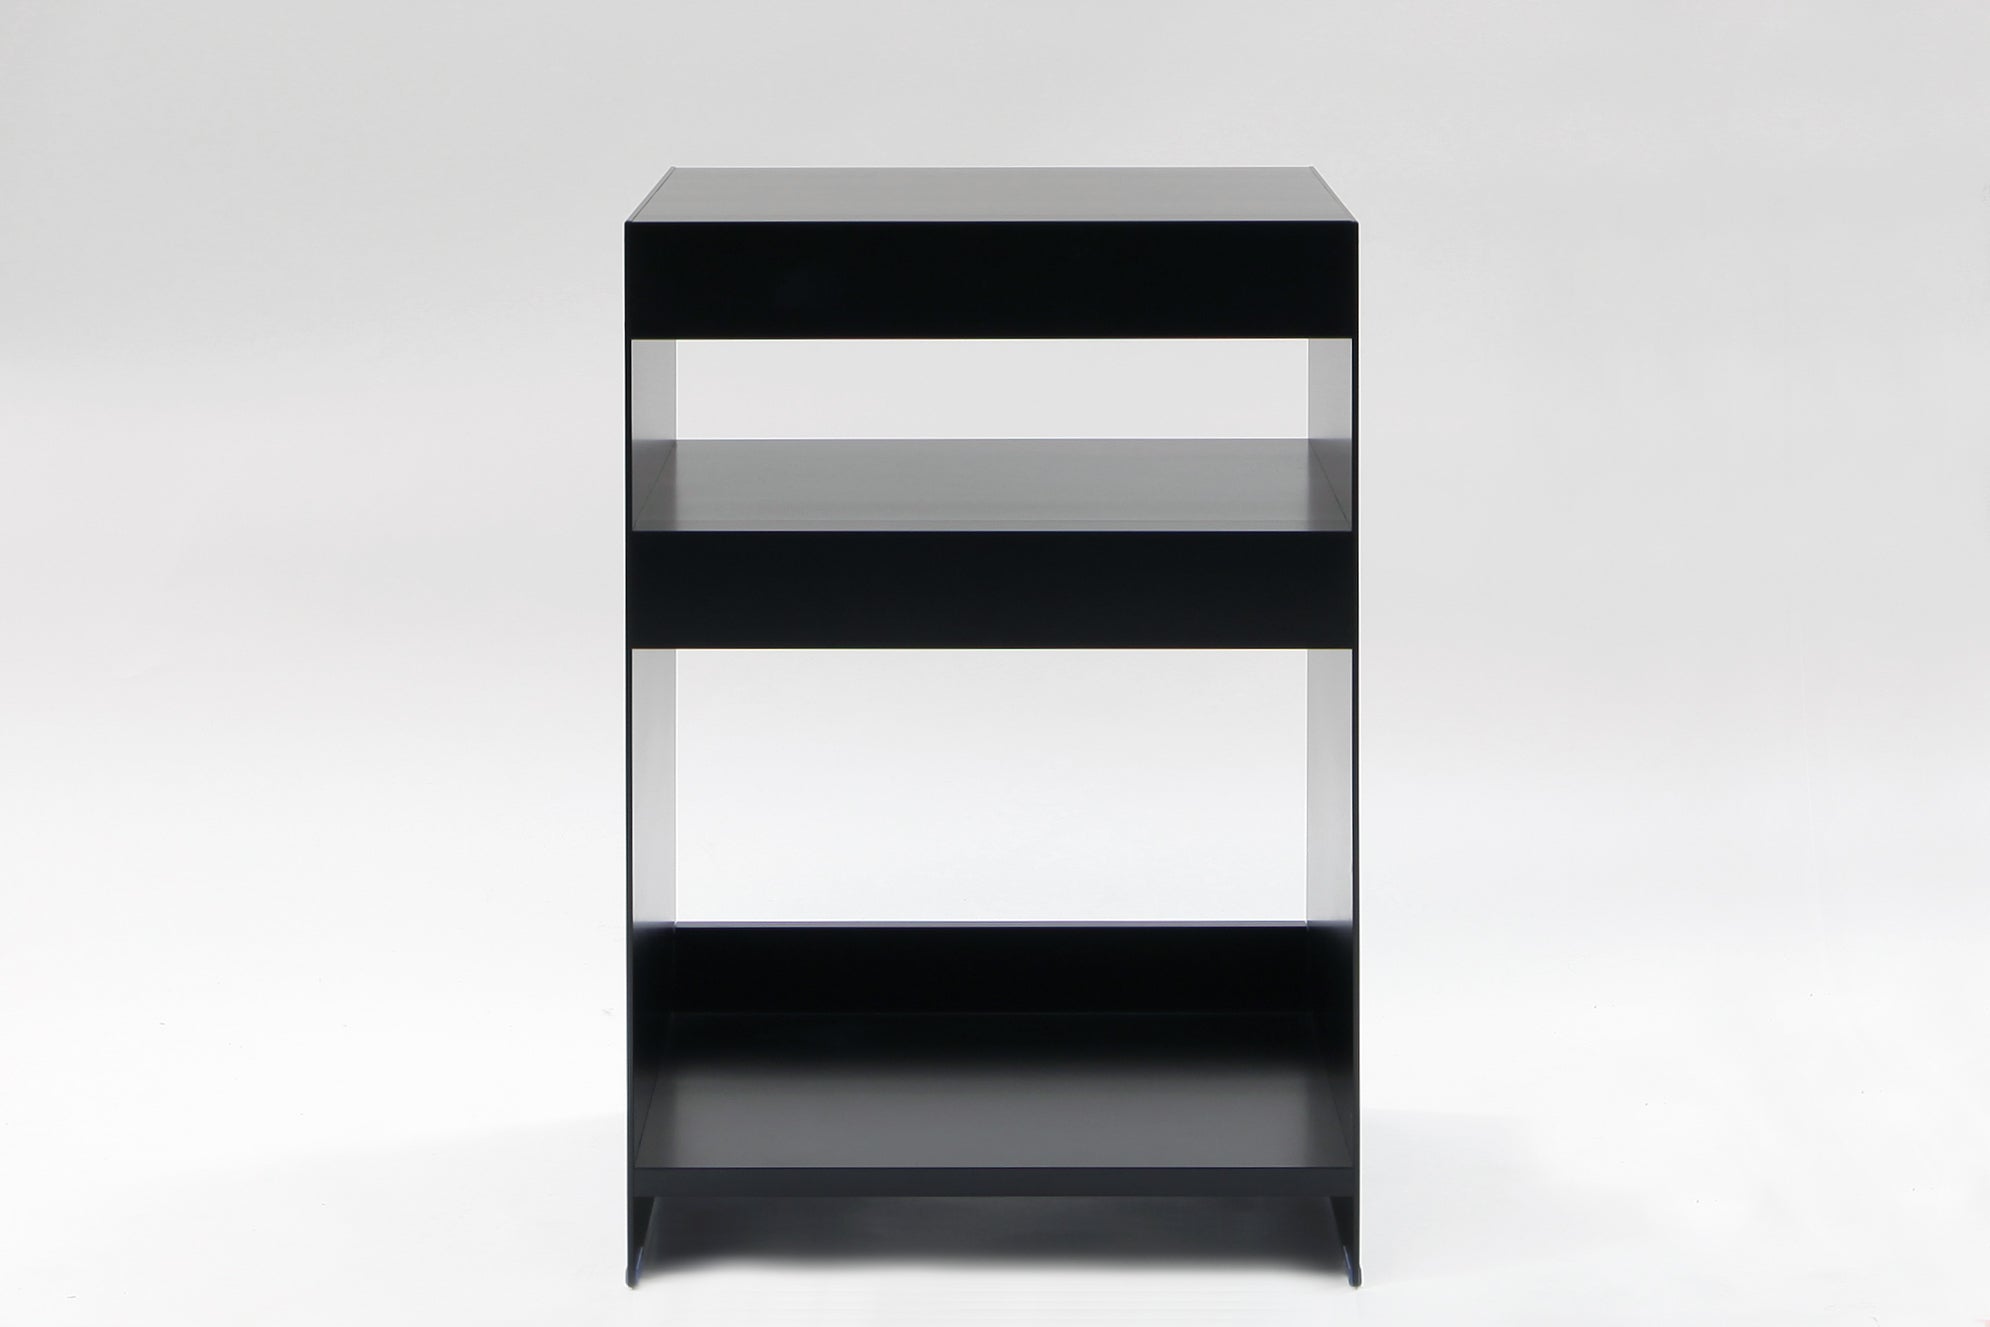 ON&ON H2 modern aluminium side table with a black powder coated finish